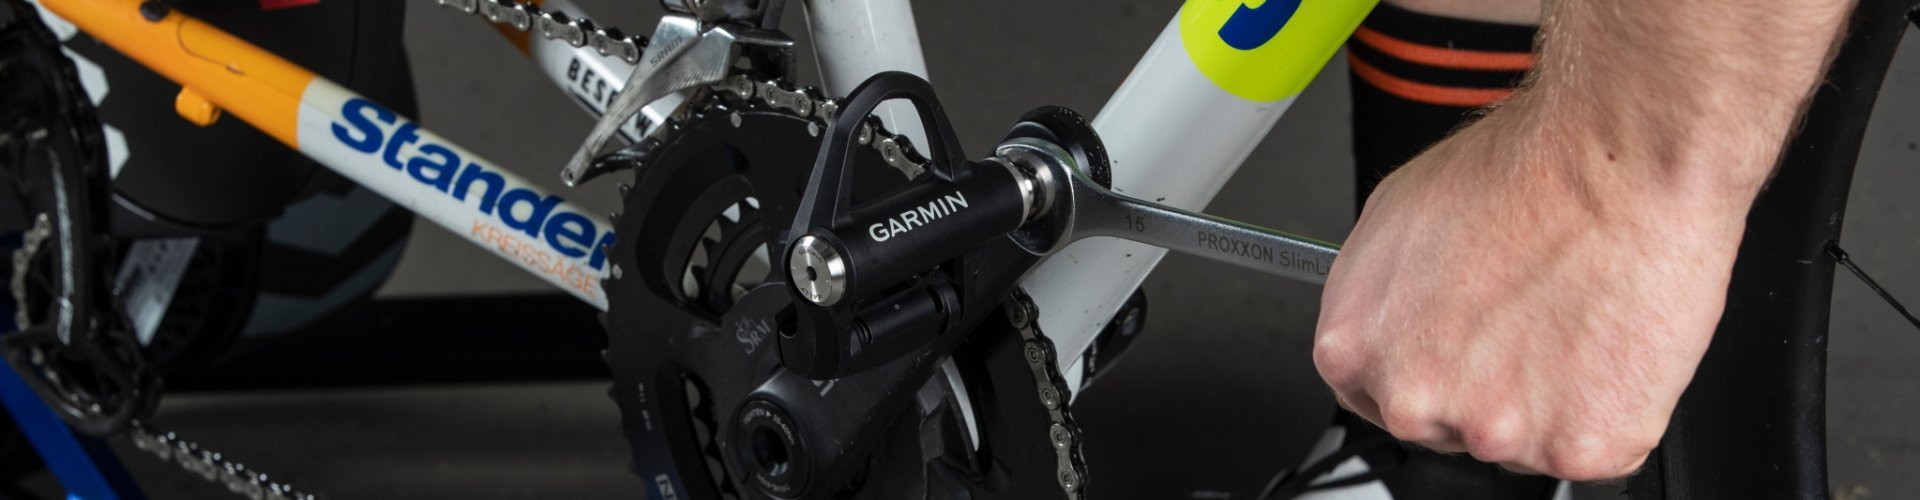 We got to test it first-hand: the Garmin Rally pedal power meter scores with its wealth of variations, and thus makes power measurement possible across all areas of use.